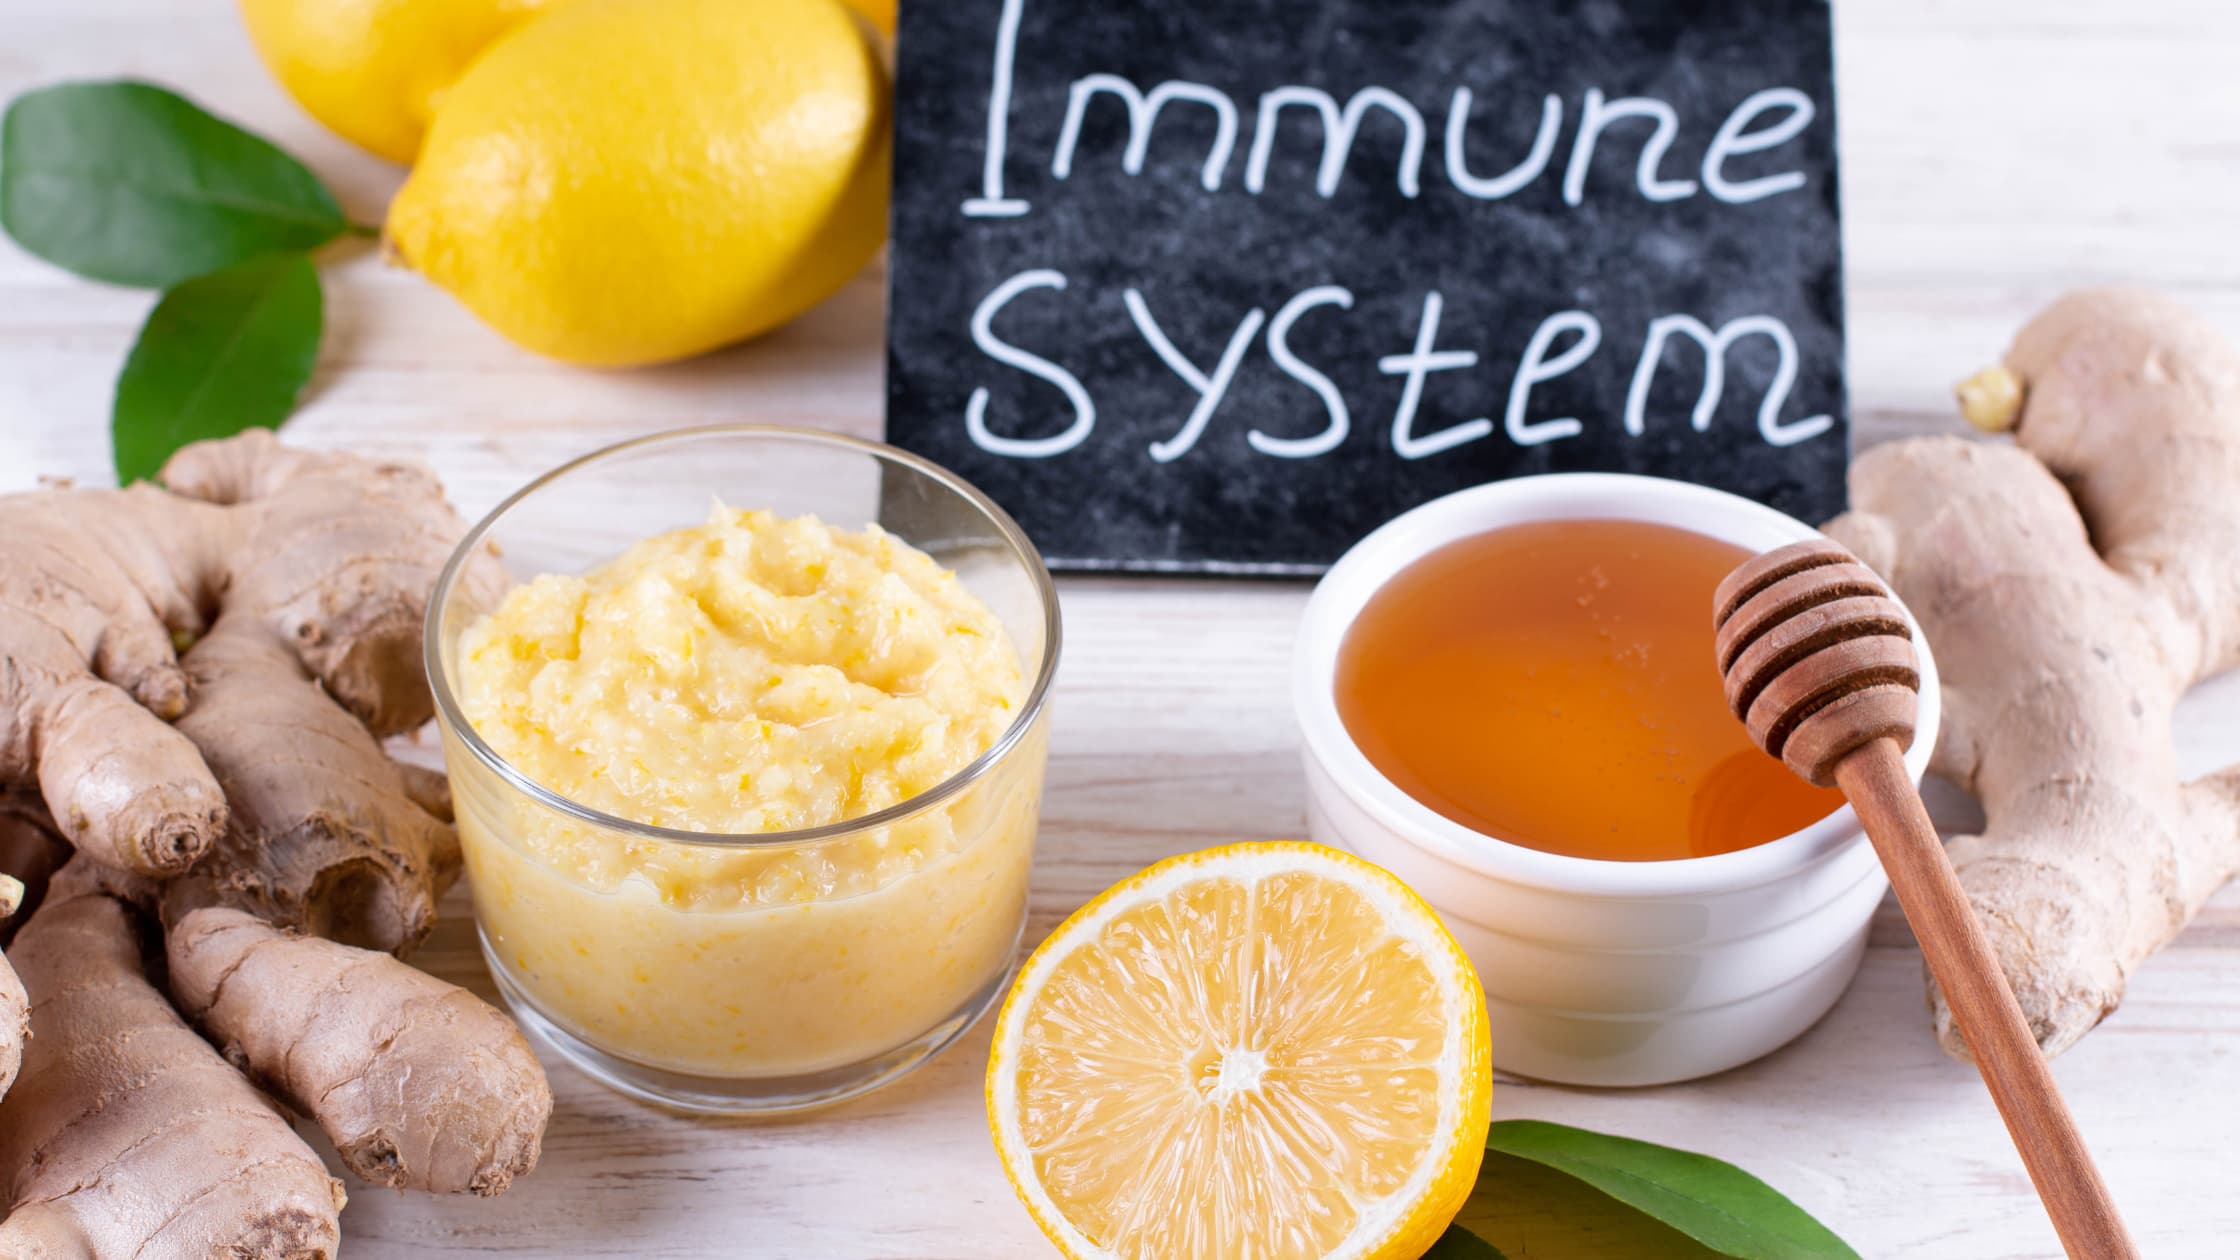 Lifestyle changes to help your autoimmune condition